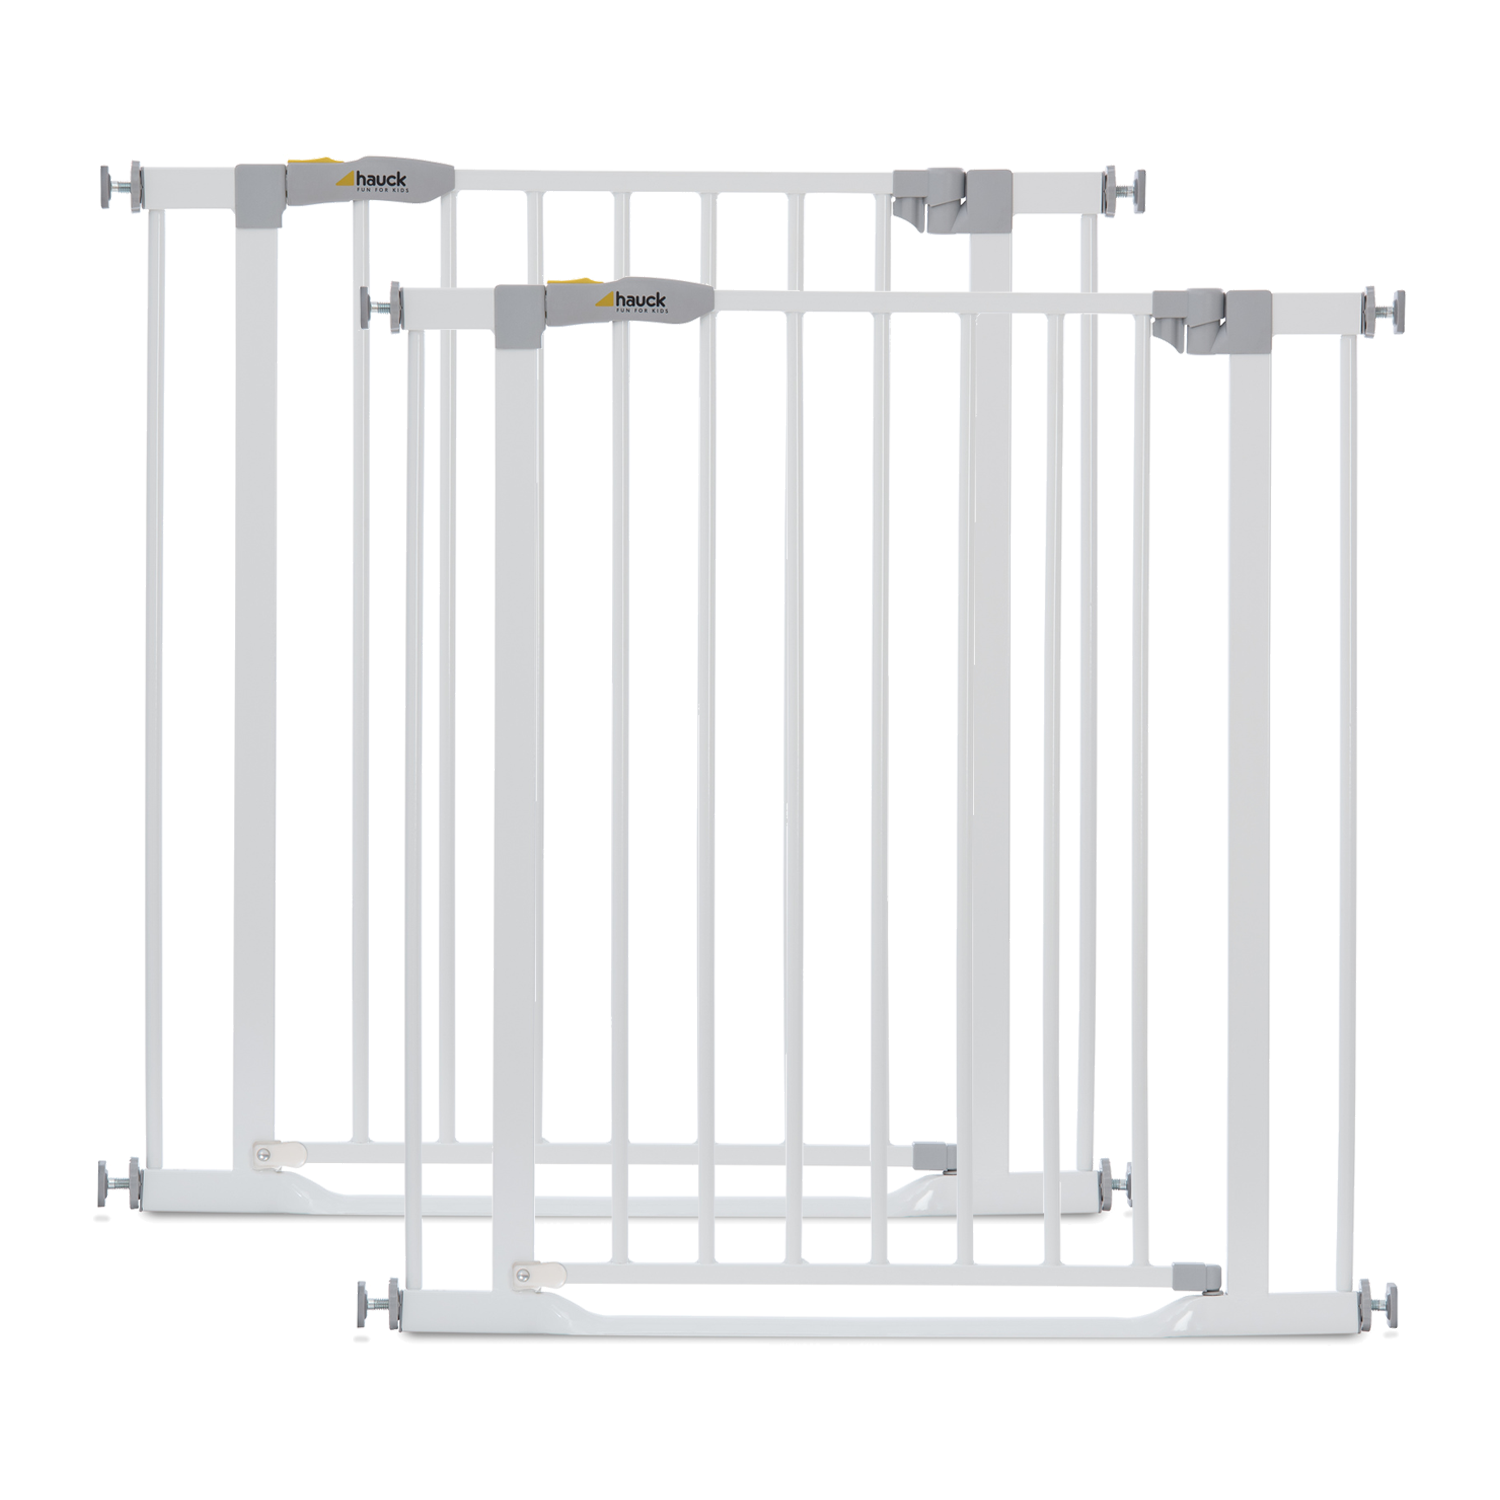 Hauck Clear Step Flat Baby Safery Gate (75cm - 80cm) (Pack of 2) - White